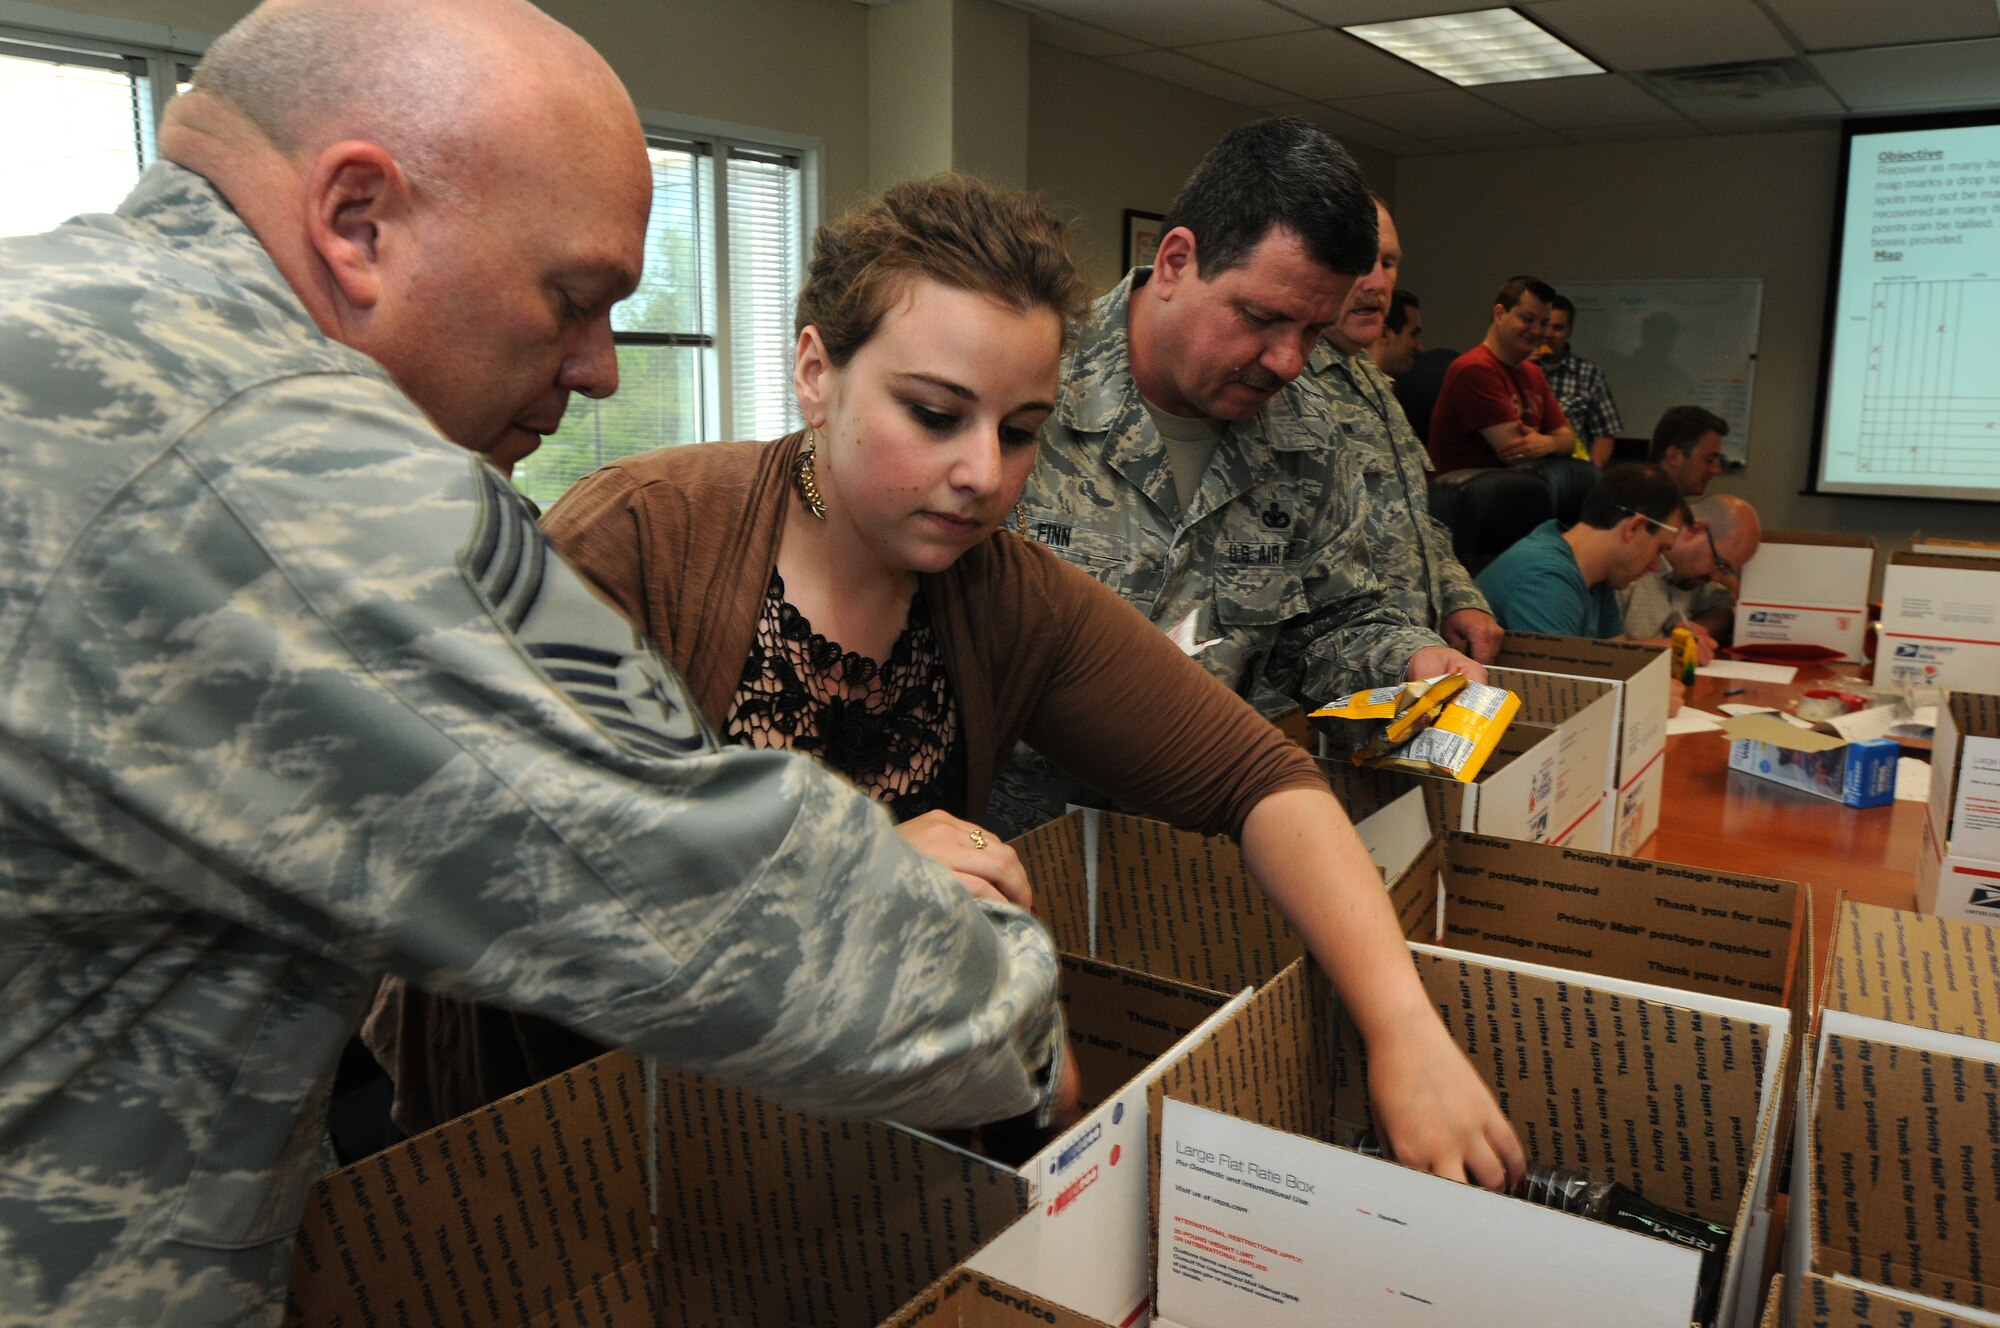 Wing volunteers spend their May 17 afternoon assisting employees from Verilgue, Inc. in building care packages destine for overseas-deployed military members. The 111th Fighter Wing Anti-Terrorism Officer, Chief Master Sgt. Paul G. Frisco, Jr. (left), Verilogue’s Global Field Coordinator,  Floriana Webb and Security Forces Superintendent, Chief Master Sgt. James Finn along with others stuffed 36 boxes with sweets, letters and trinkets to thank deployed servicemen and remind them of the strong support locally for their sacrifices.